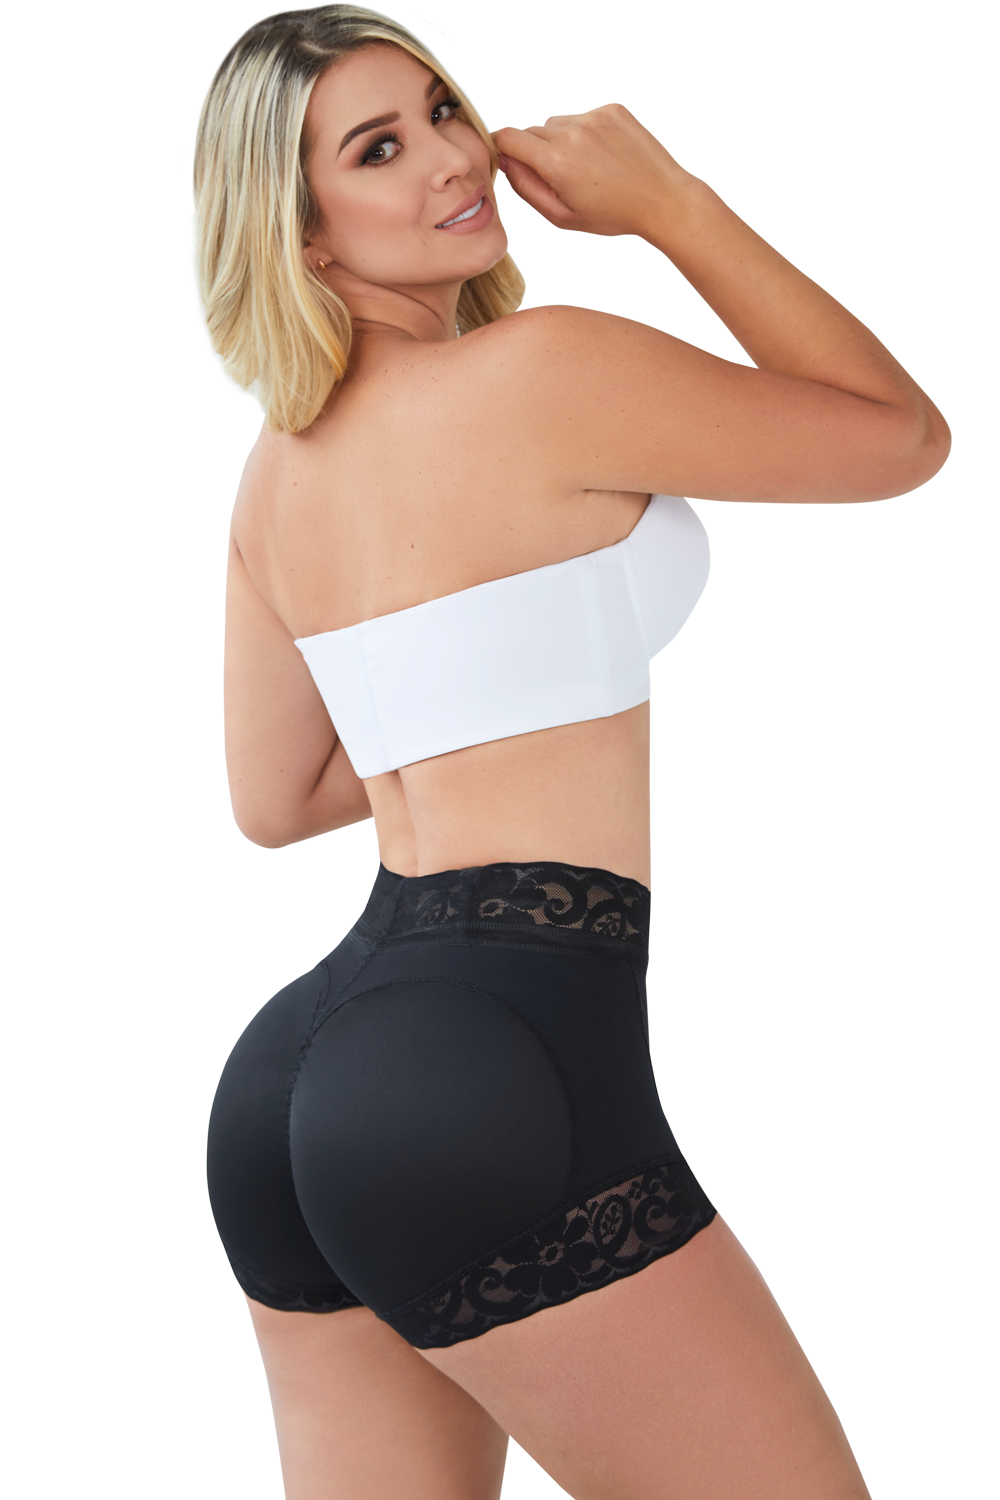 👀 Boost Your Curves with Jackie London's Panty Gluteus Enhancer! 🔝